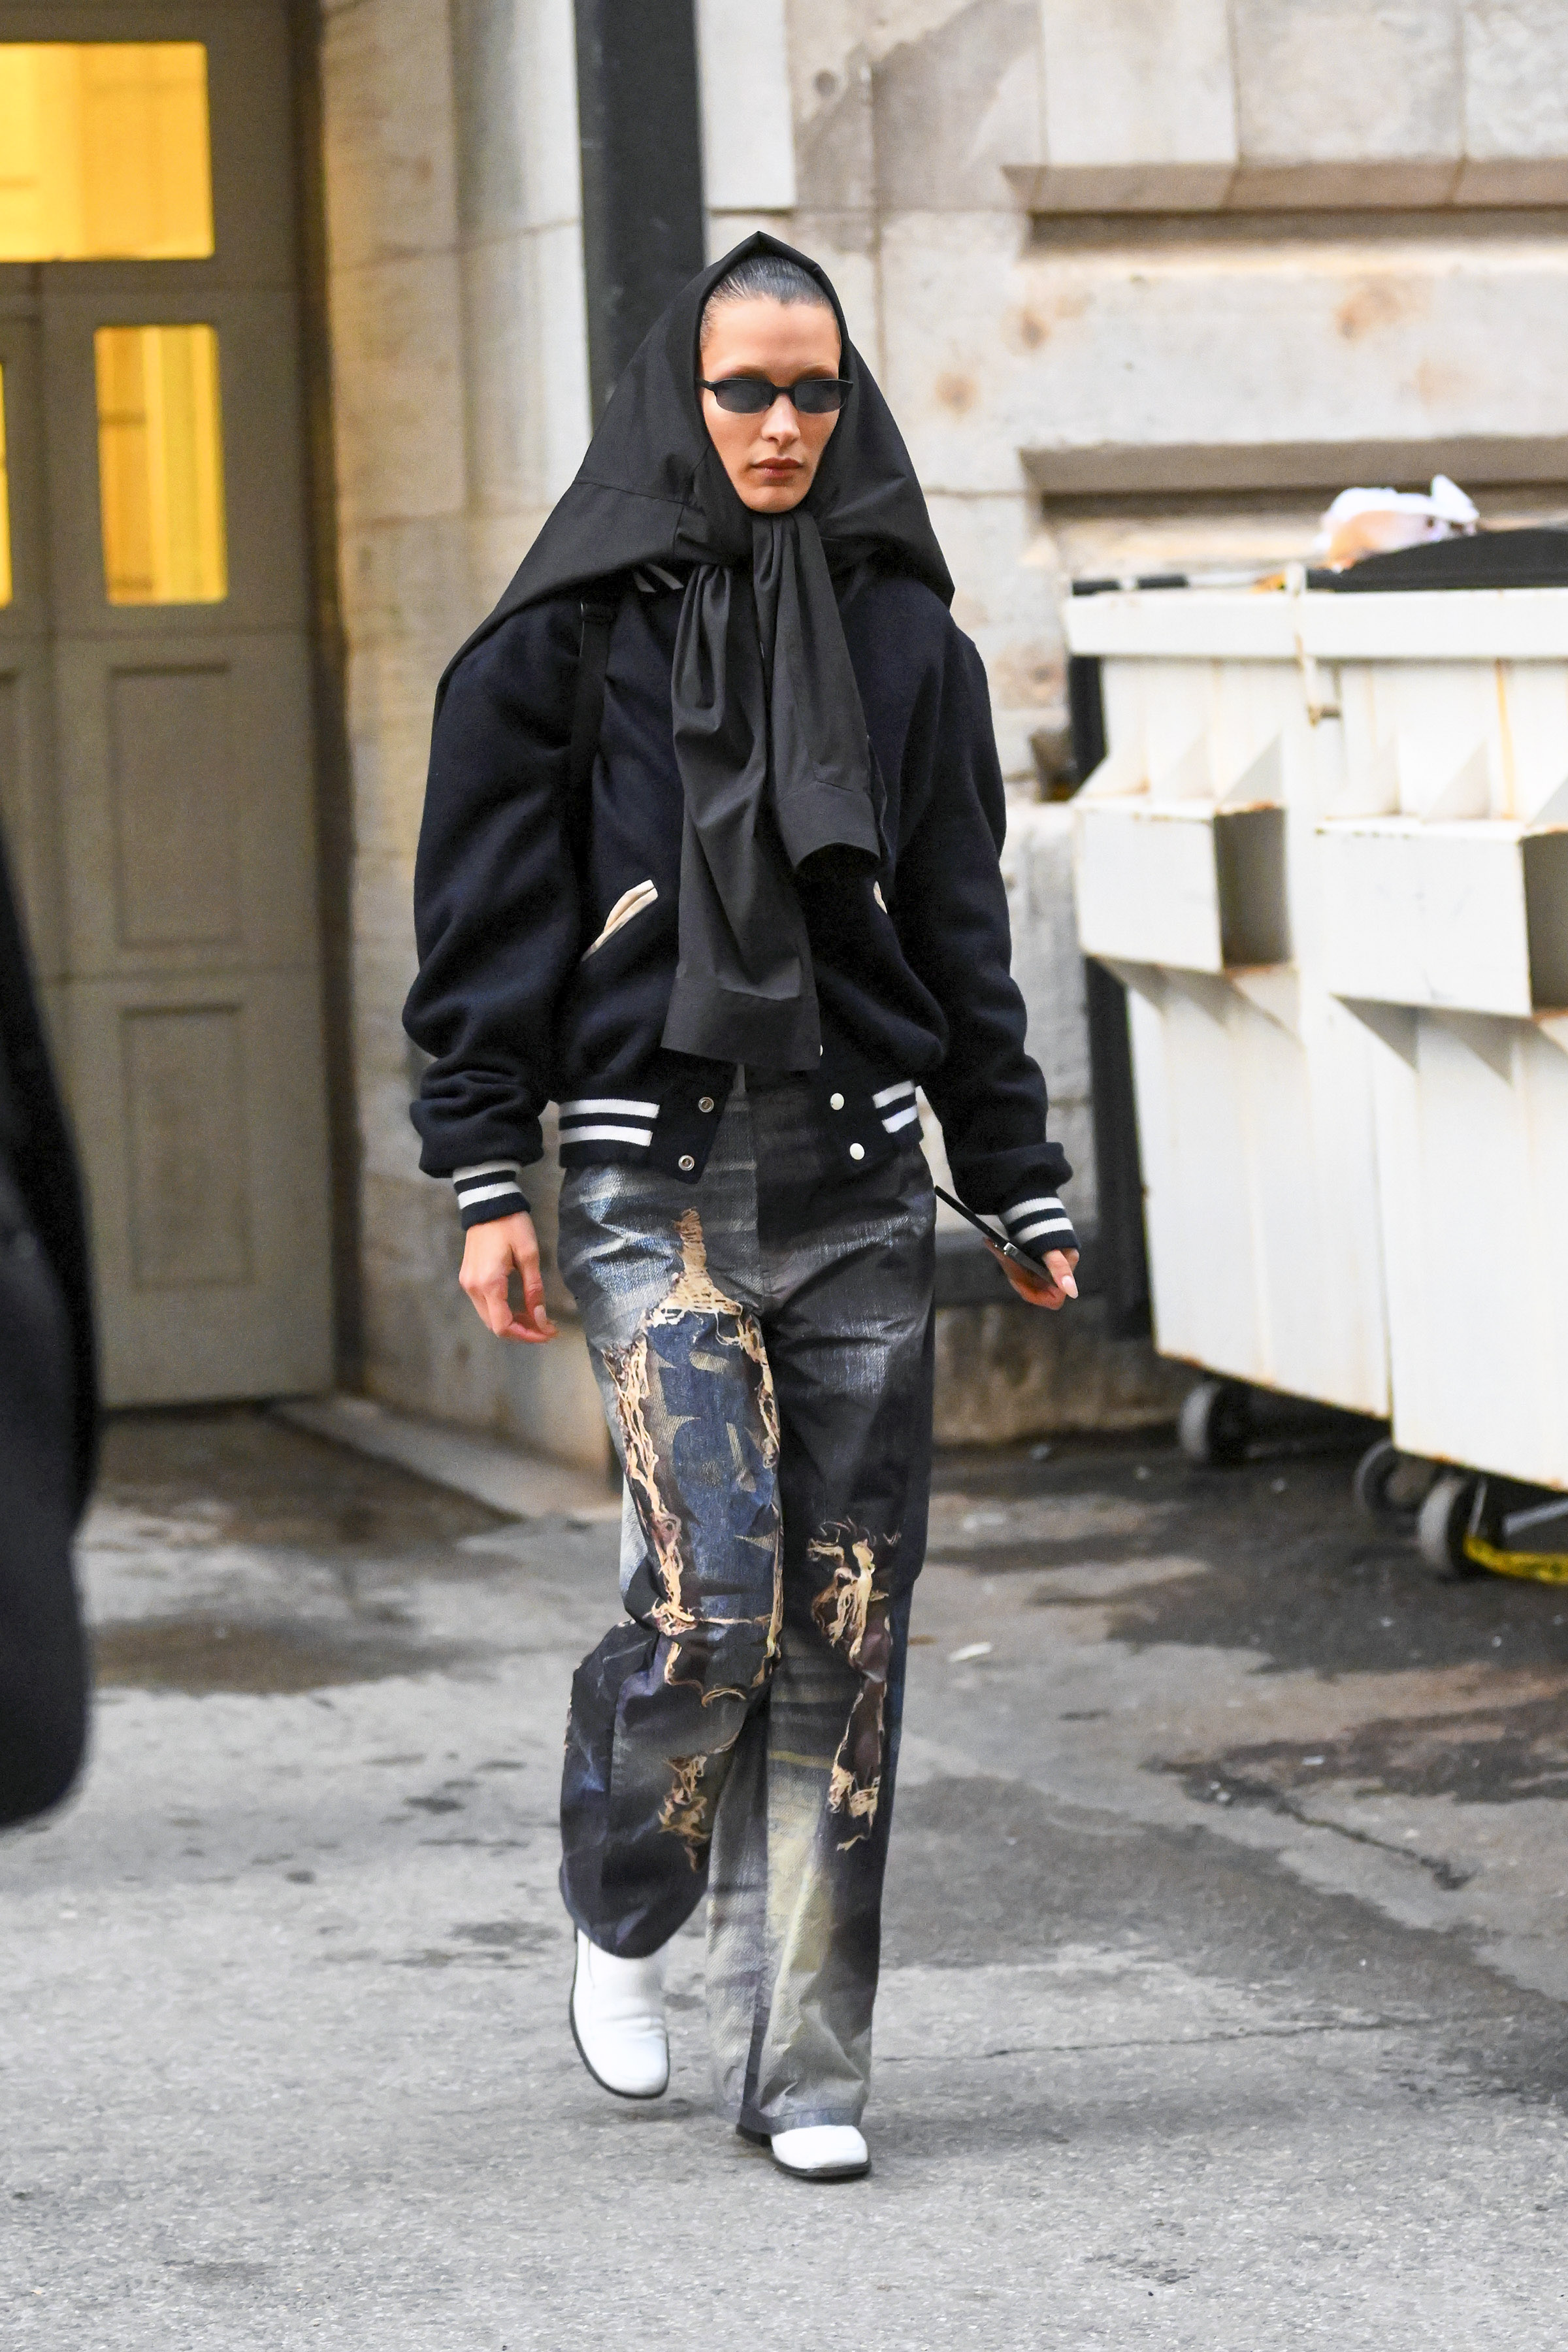 Bella Hadid wanted to avoid the photographers so as not to show her new look while leaving an exclusive fashion event: for this, she put a jacket over her hair.  She wore patterned jean pants and a black jacket.  Also, she wore sunglasses.